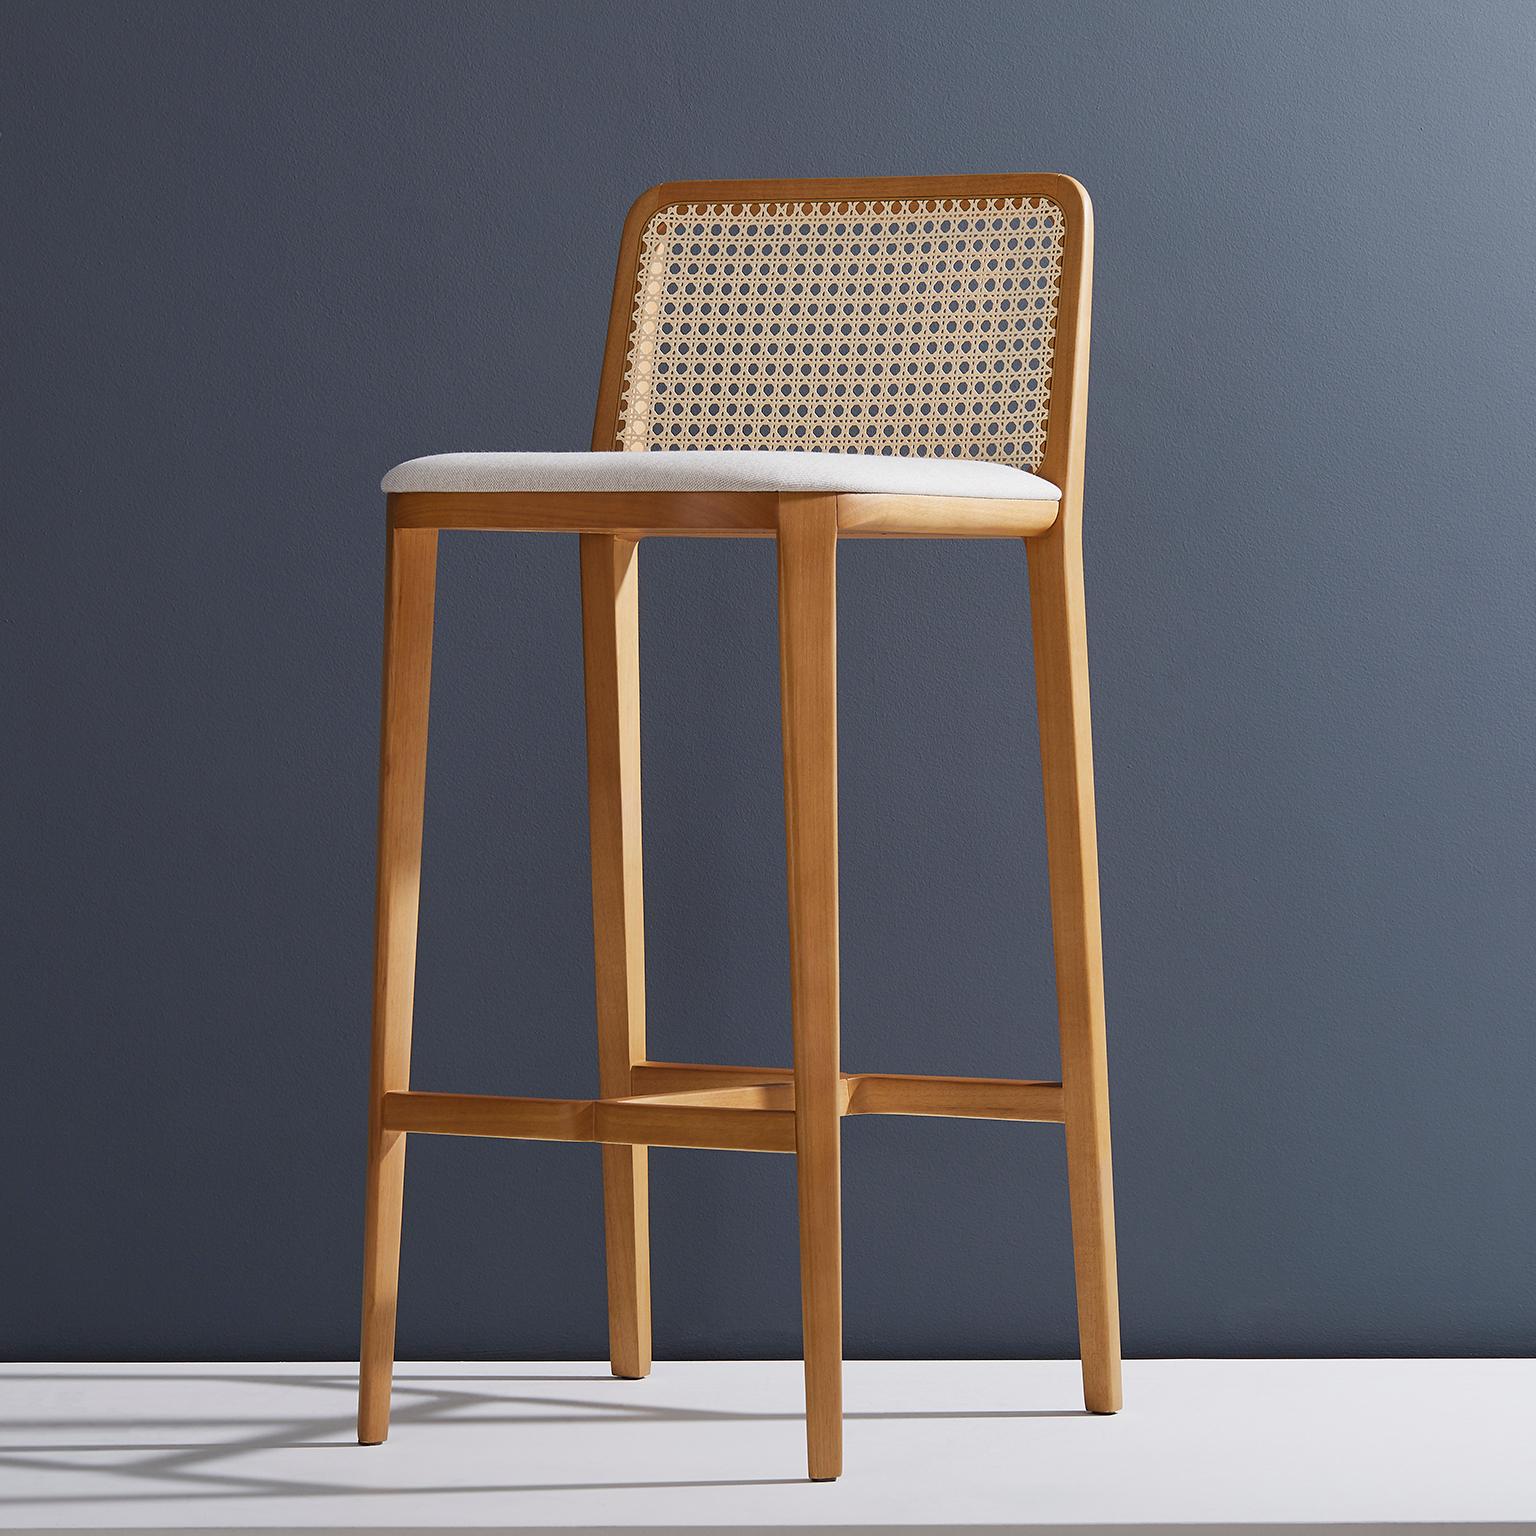 Minimal Style, Solid Wood Stool, Bar or Counter Hight, Caning and Leather For Sale 2